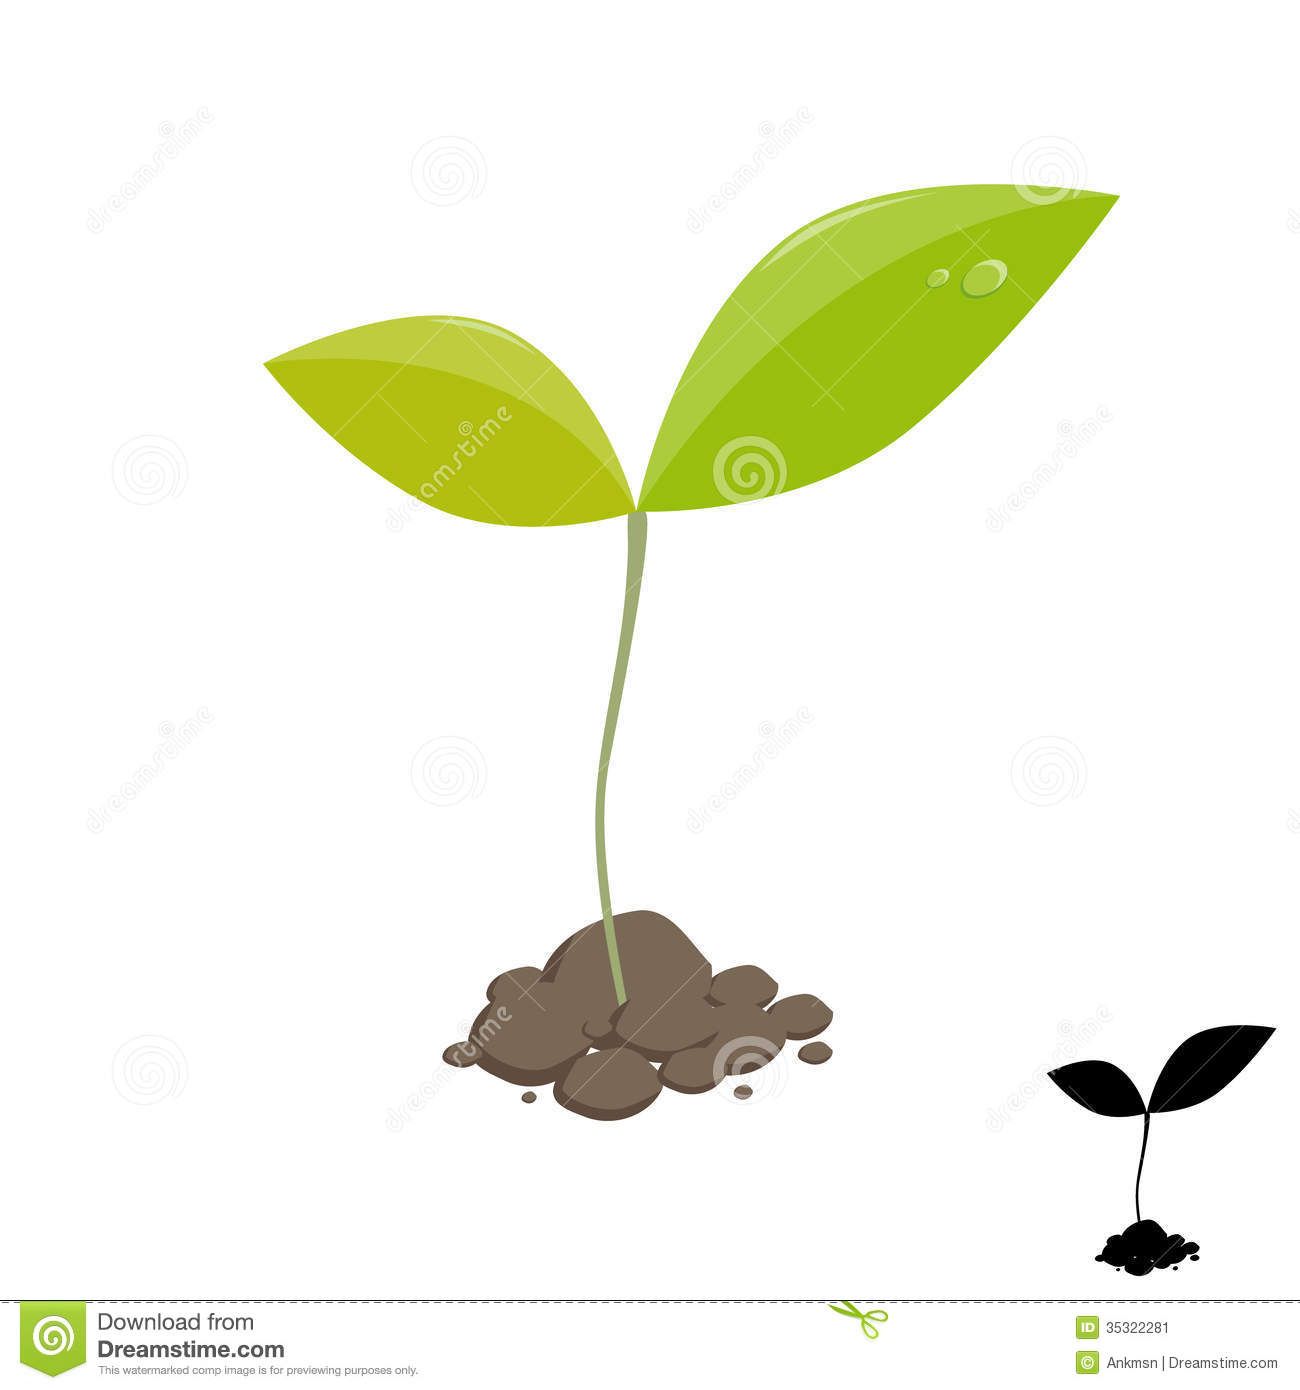 Sprouting seed little plant. Seedling clipart sprouted